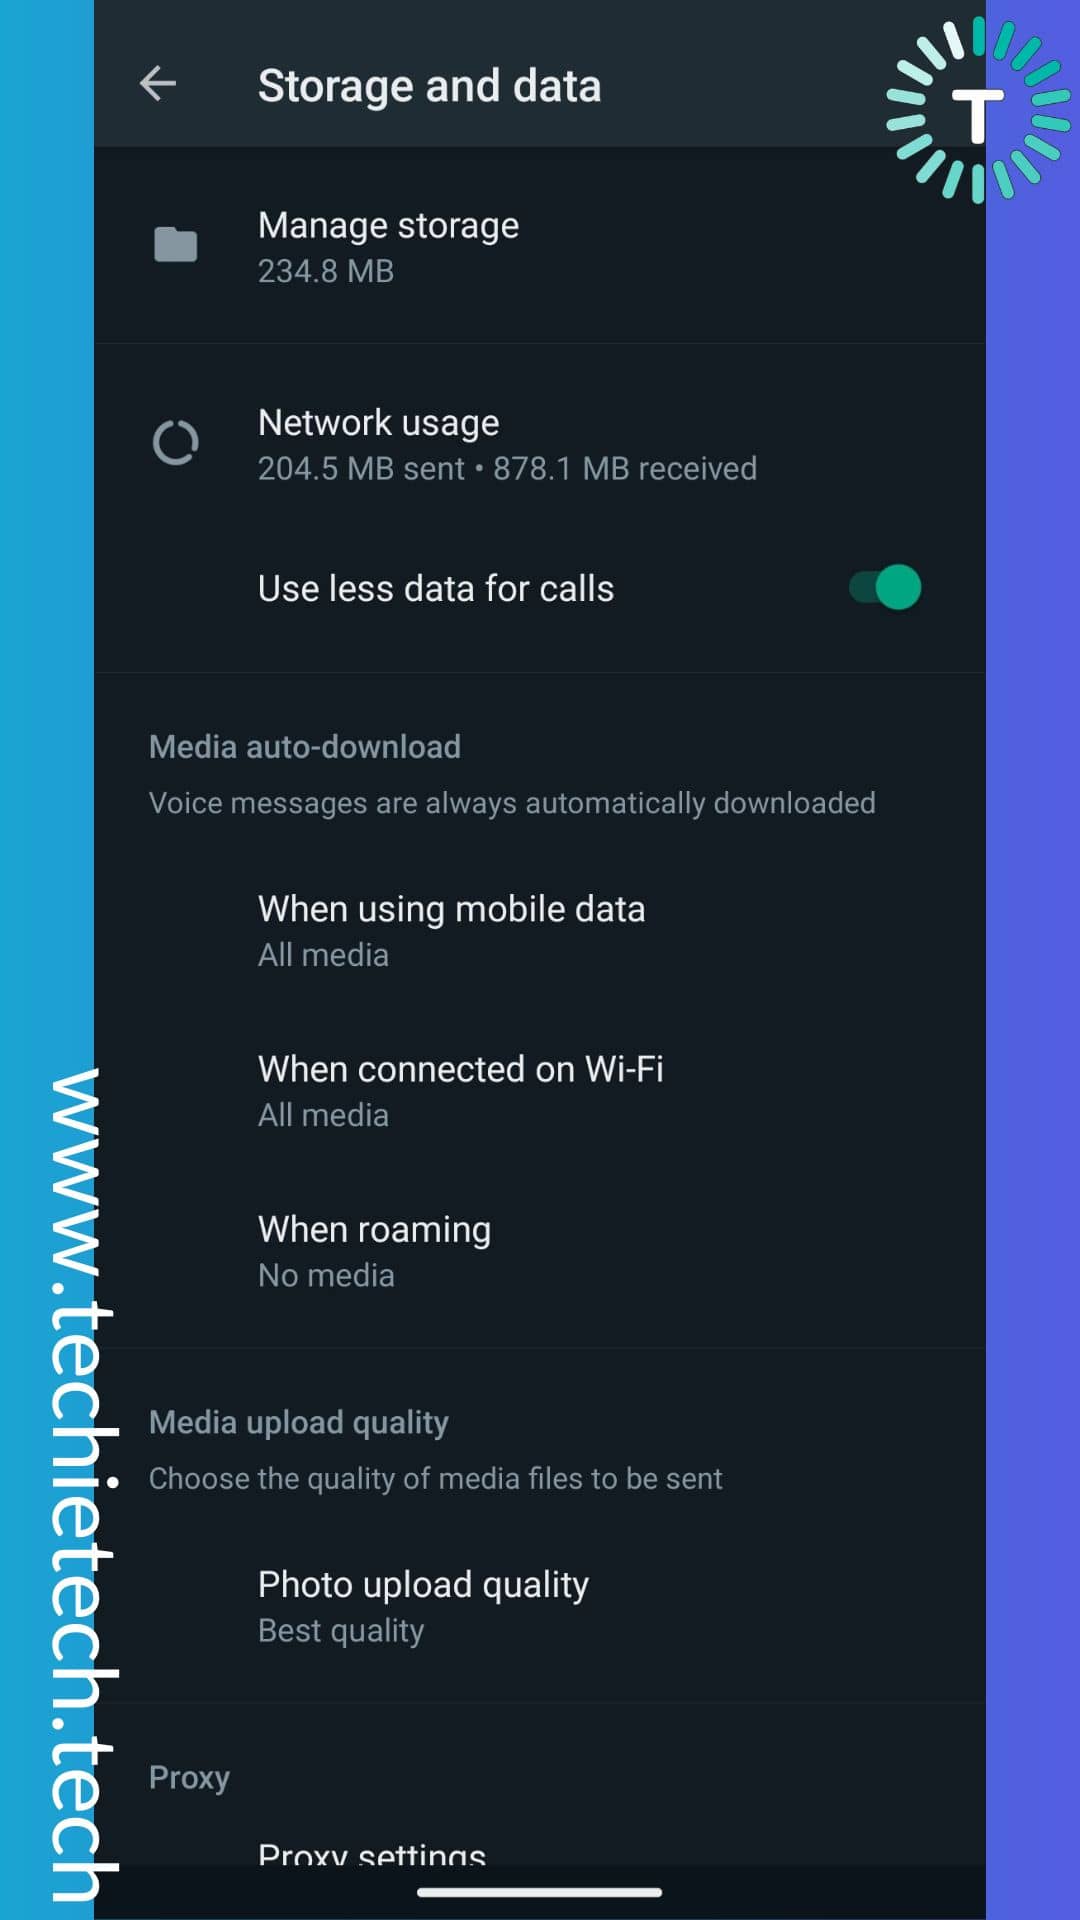 Toggle to disable less data for calls